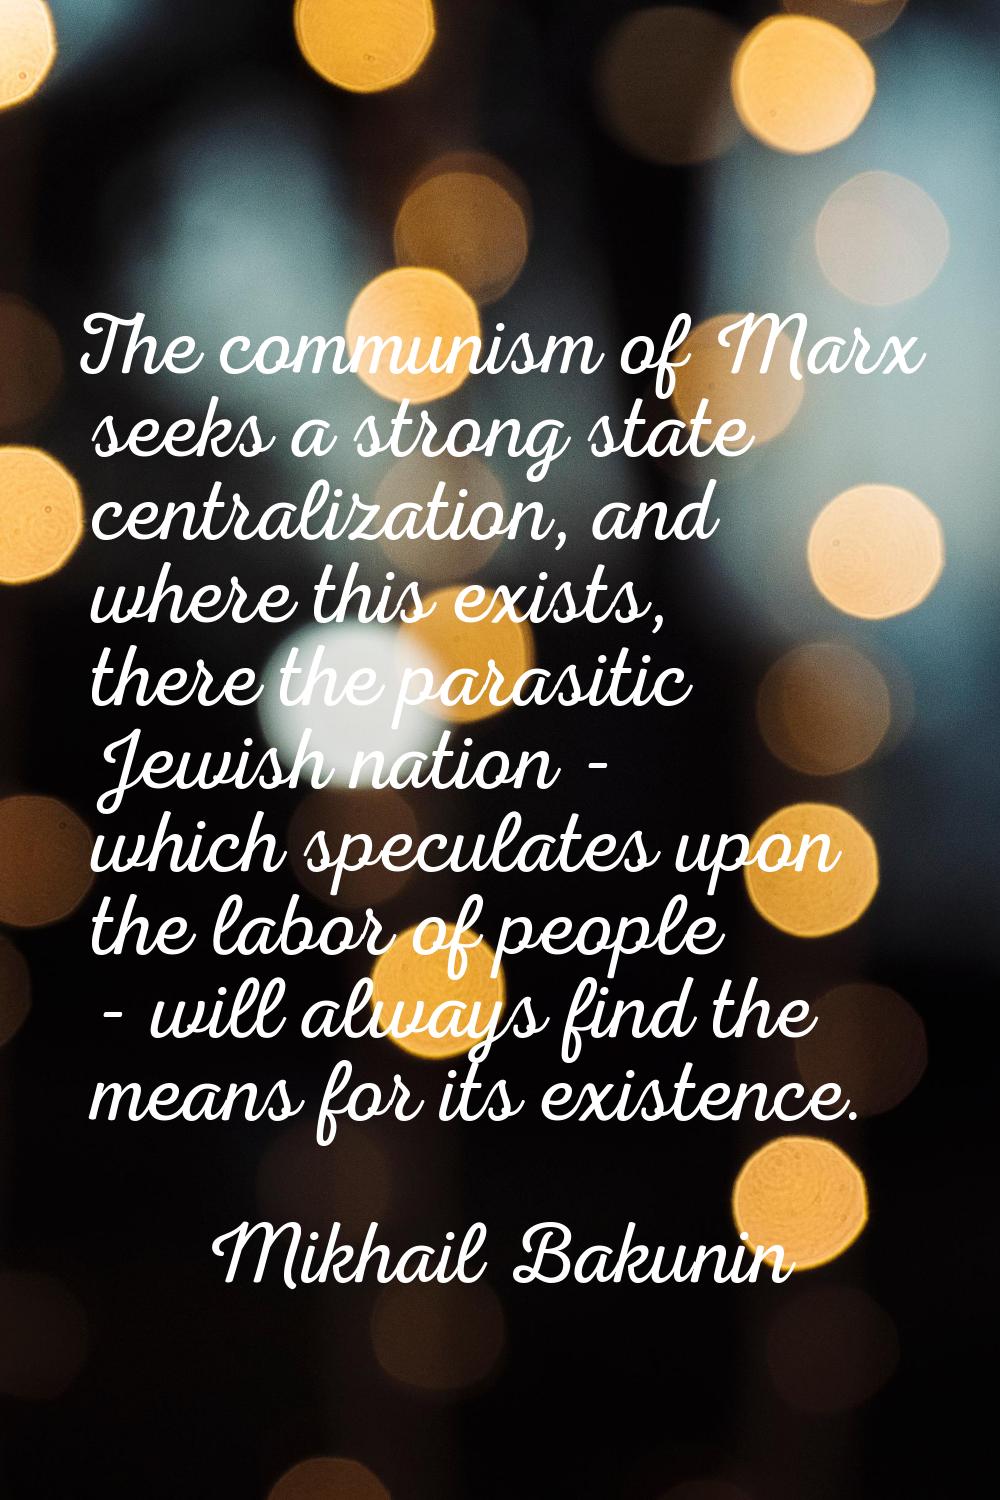 The communism of Marx seeks a strong state centralization, and where this exists, there the parasit